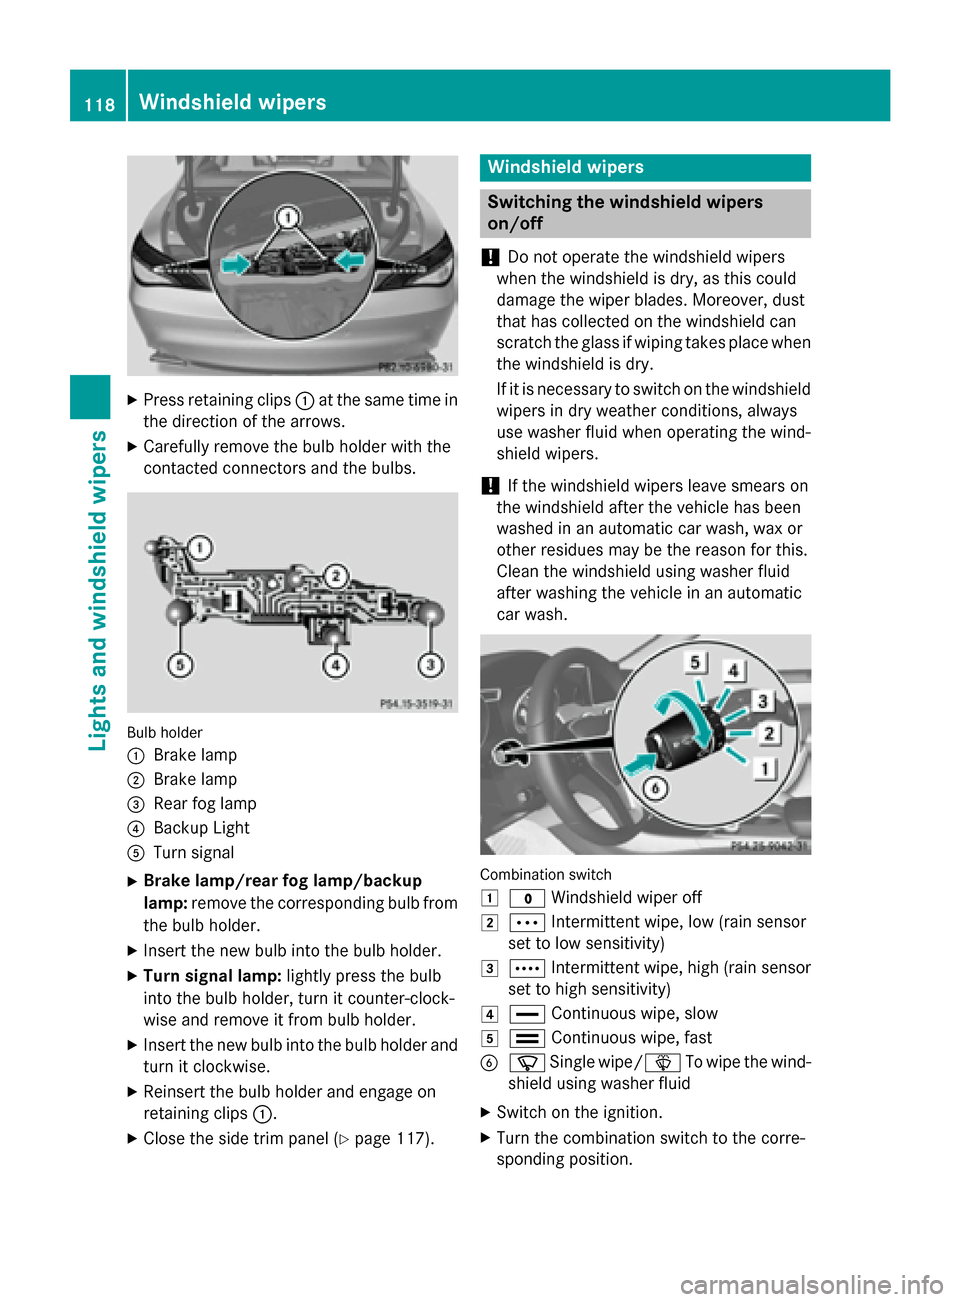 MERCEDES-BENZ CLA-Class 2014 C117 Owners Manual X
Press retaining clips 0043at the same time in
the direction of the arrows.
X Carefully remove the bulb holder with the
contacted connectors and the bulbs. Bulb holder
0043
Brake lamp
0044 Brake lamp